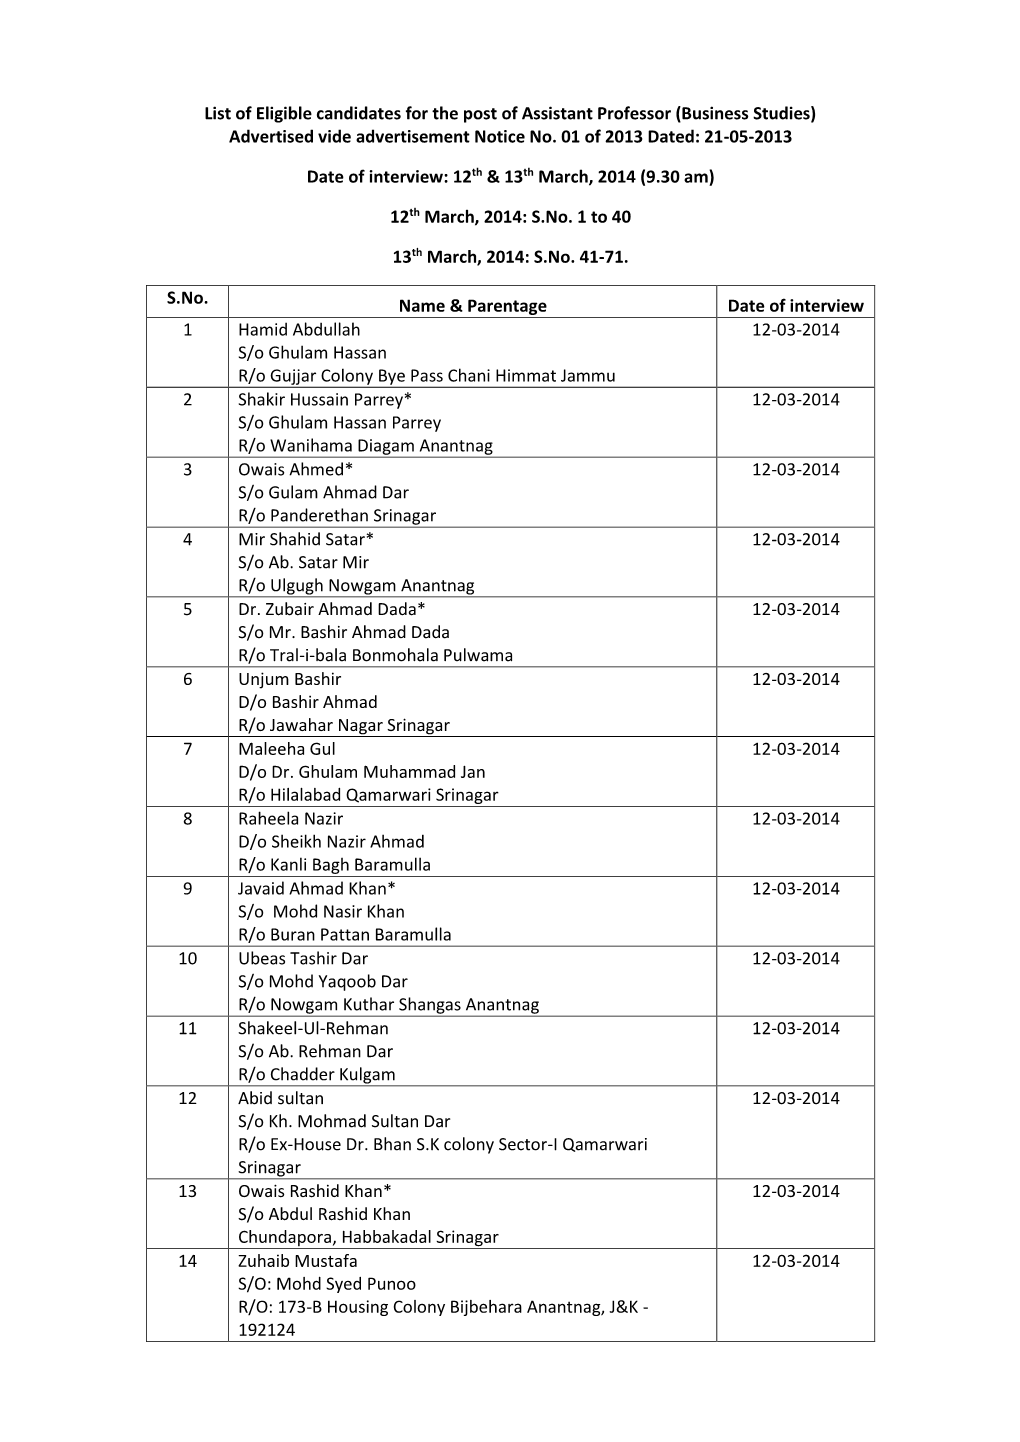 List of Eligible Candidates for the Post of Assistant Professor (Business Studies) Advertised Vide Advertisement Notice No